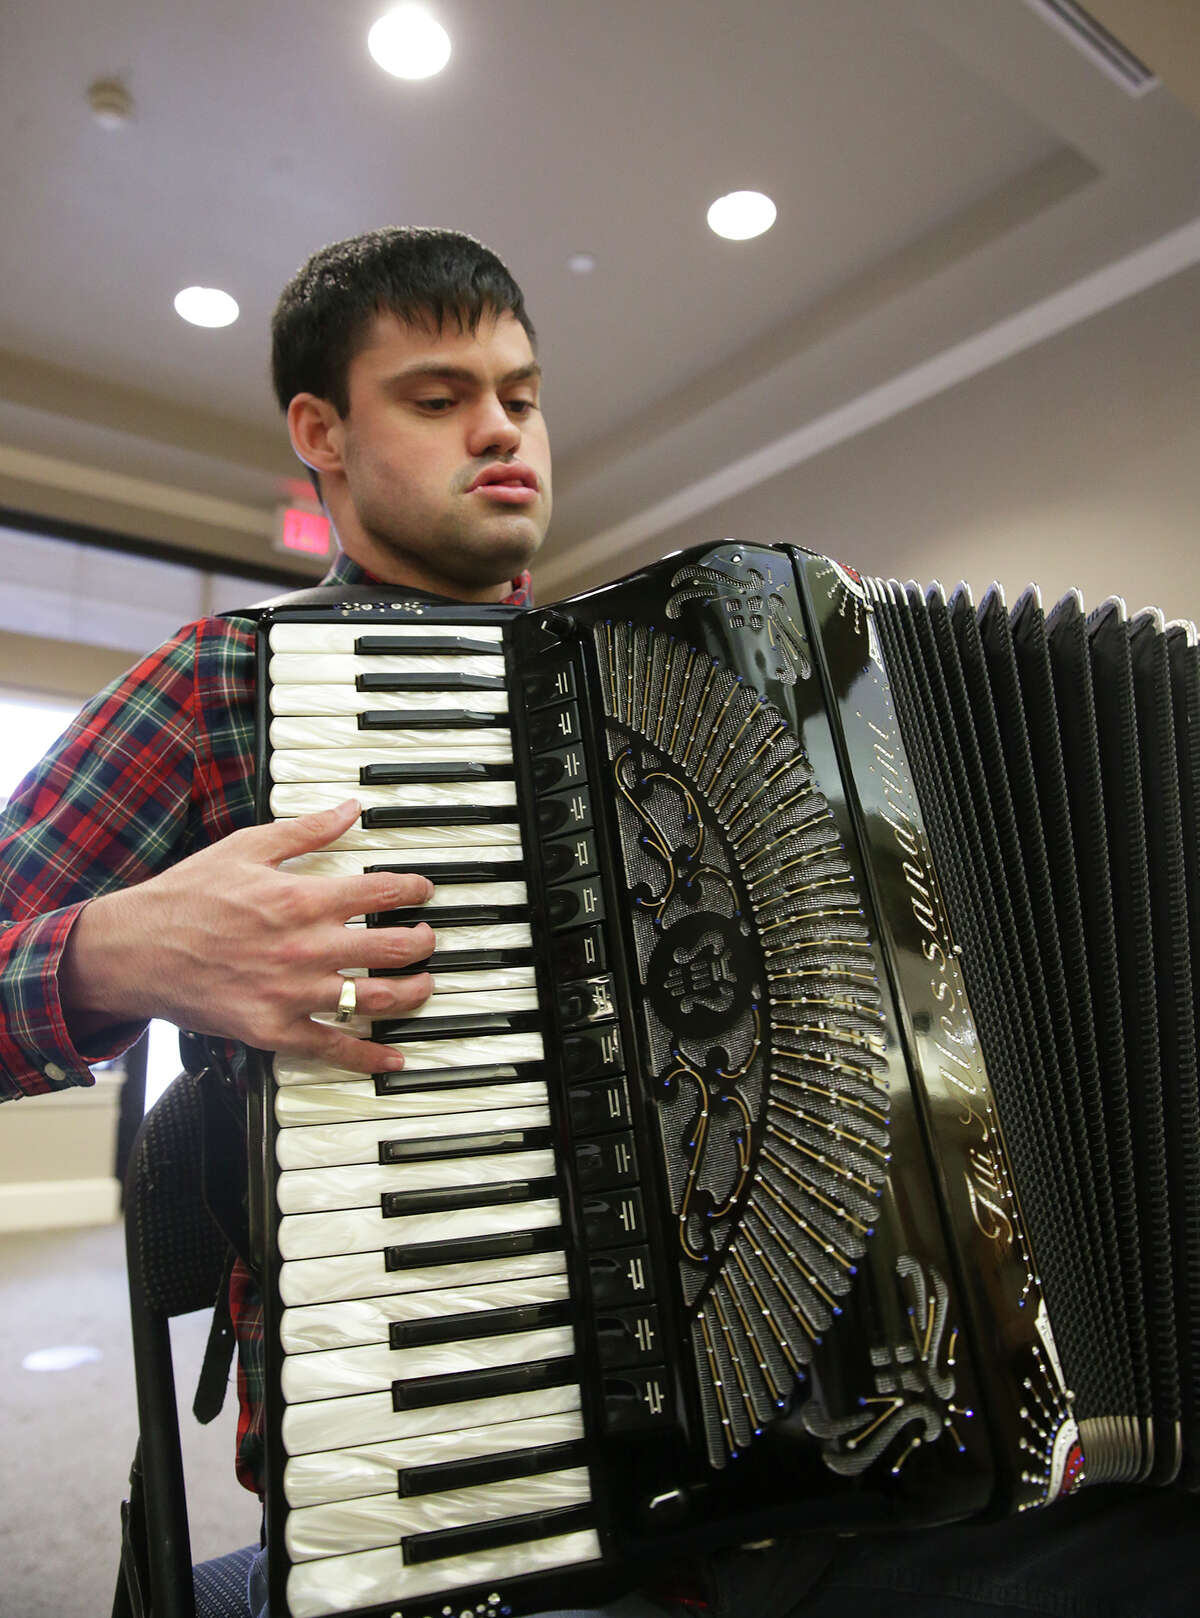 John McDonald, who has the developmental disorder Asperger's syndrome, which affects his ability to socialize and communicate effectively, performs a song on the accordion at the Kendall House Retirement Home in Boerne on Wednesday. McDonald is a good example of what autism experts advise all parents of autistic kids to do: Identify and cultivate their child’s special interests and talents as early as possible to improve the odds they’ll be able to make their own way in the world.